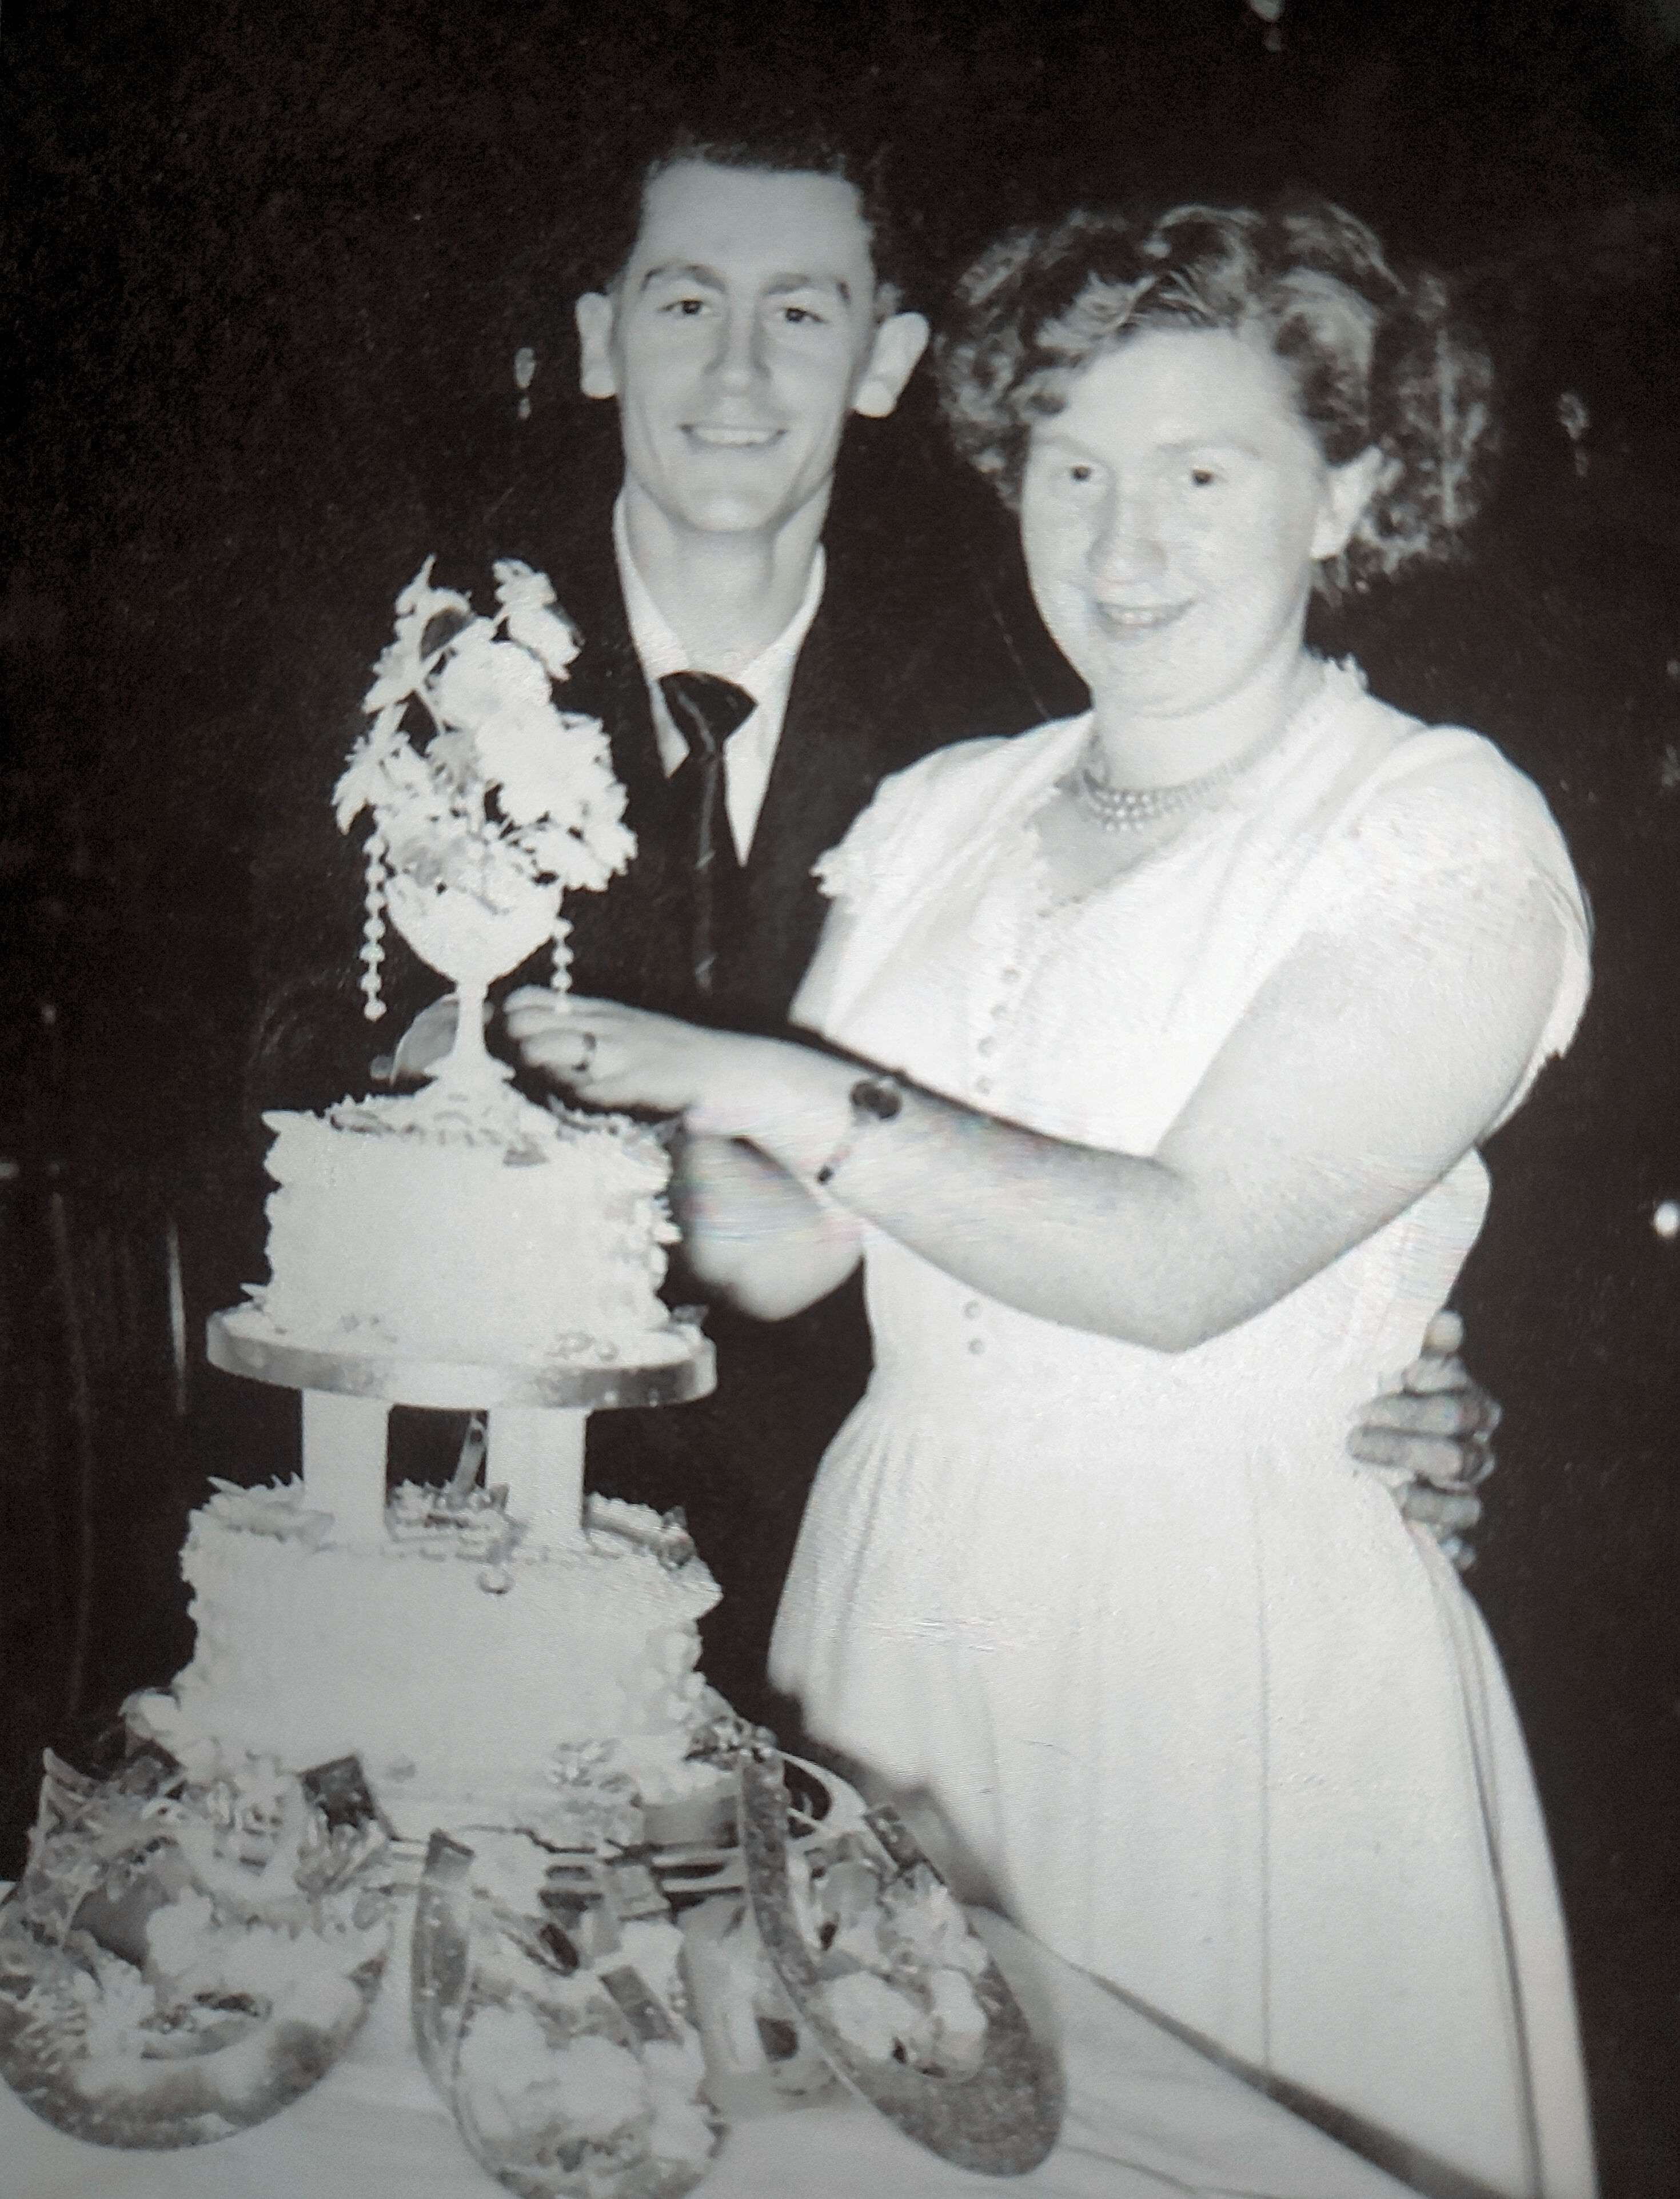 My mum and dad on their wedding day 27th June 1953, Newquay, Cornwall. 